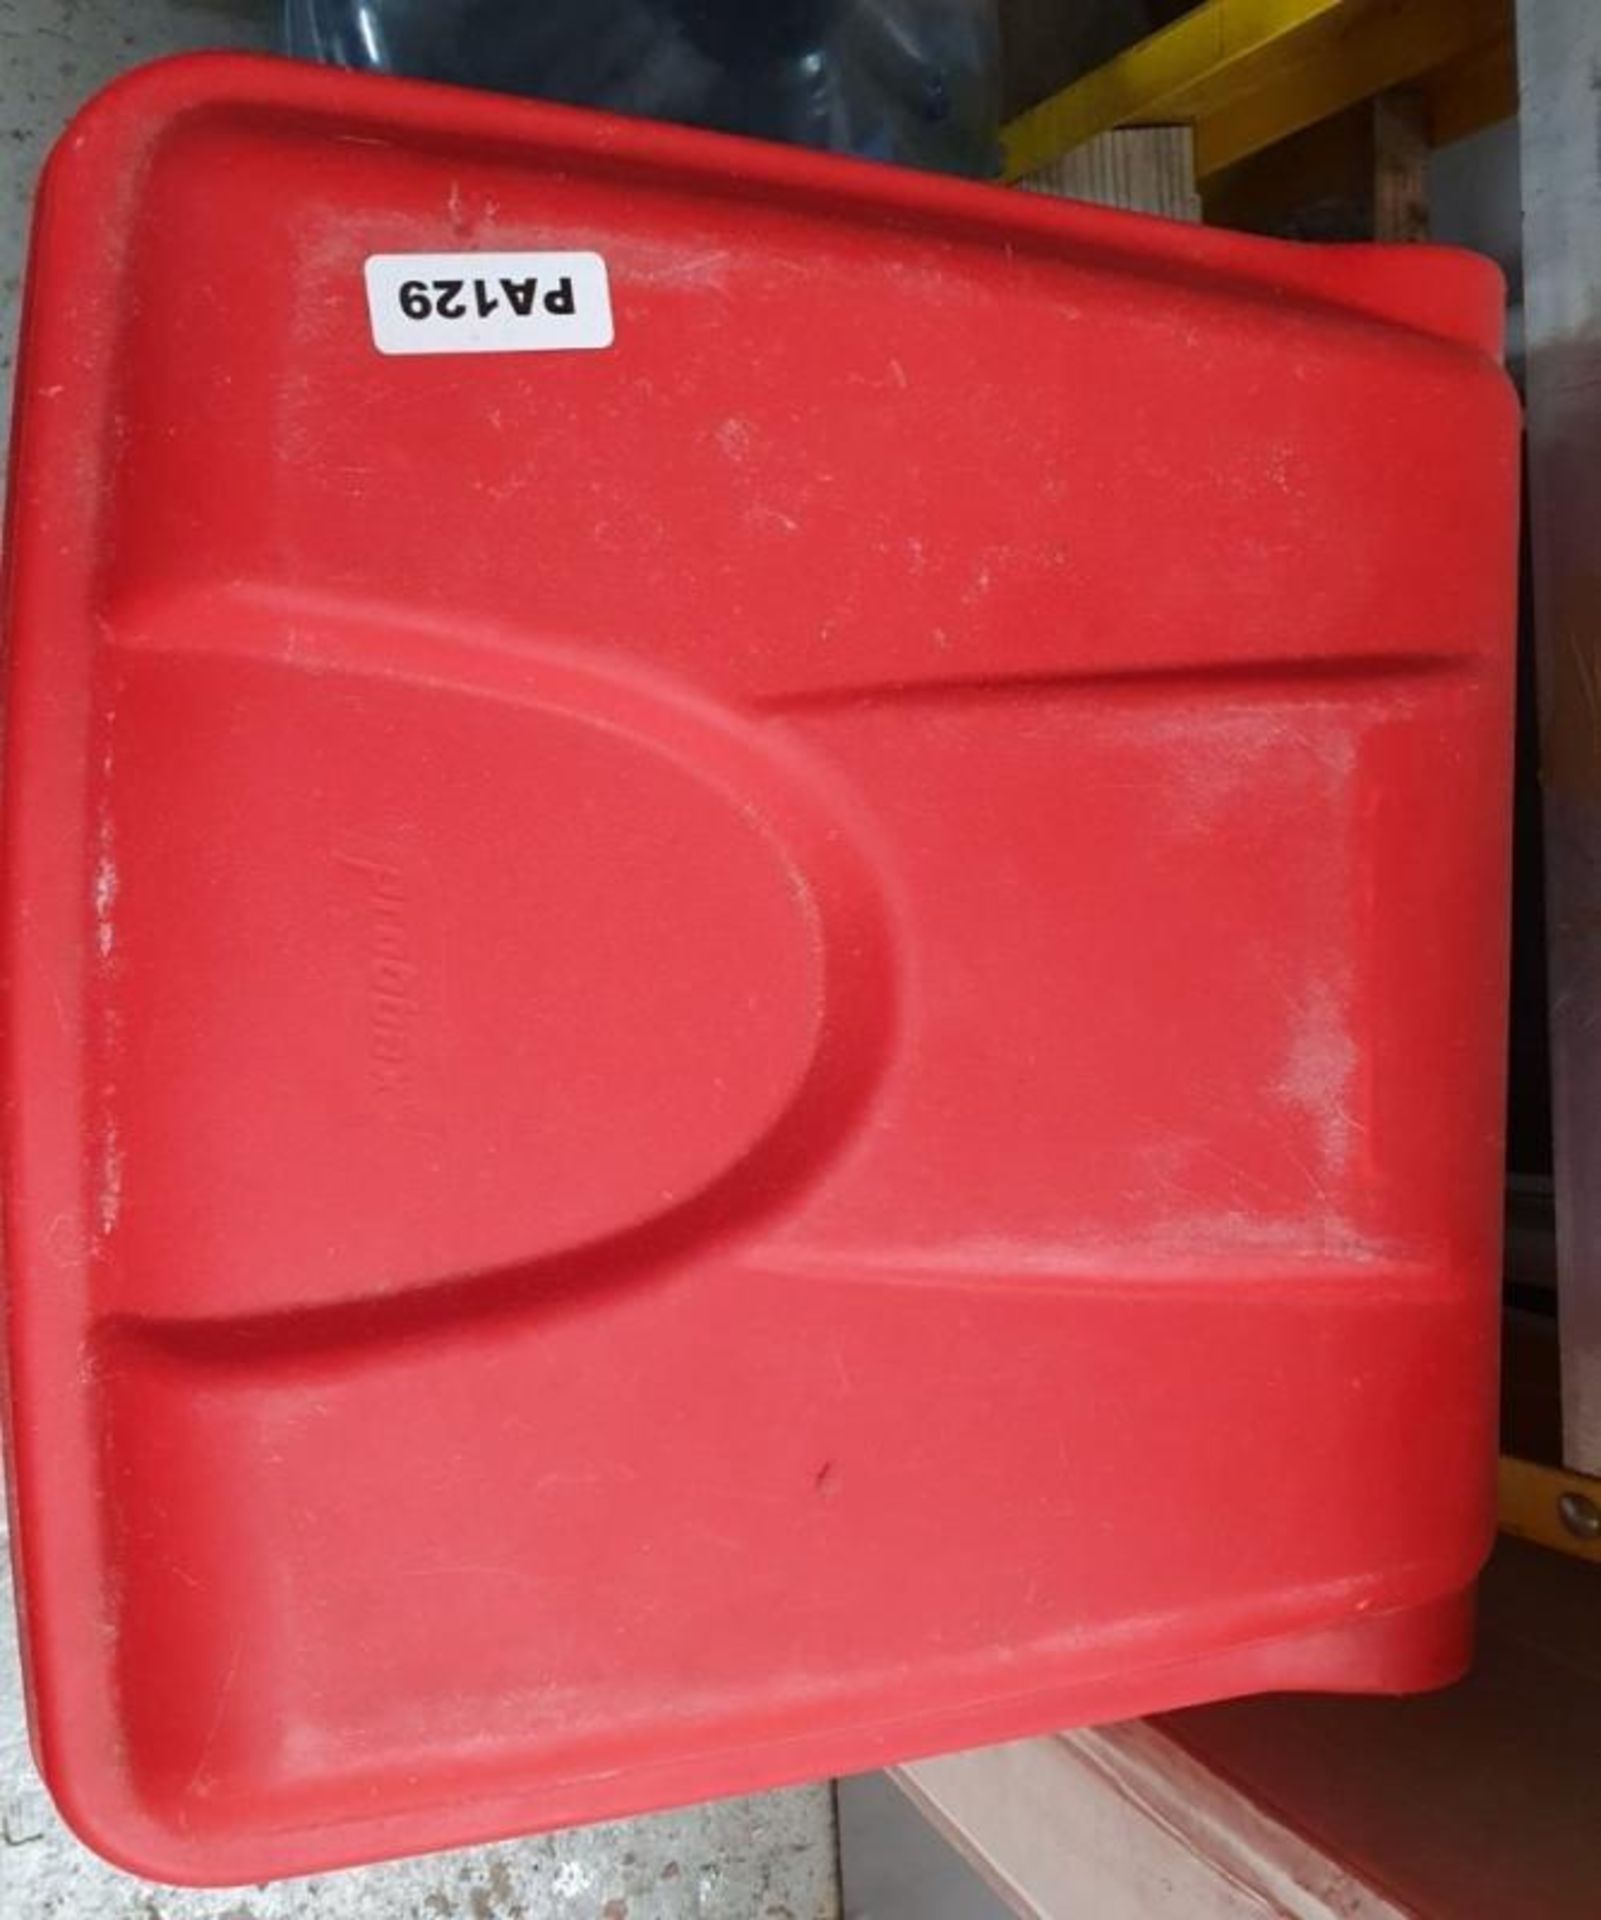 1 x Red Waste Bin - Ref PA129 - CL463 - £1 Start, No Reserve - Ref: WH1 - CL011 - Location: Altrinch - Image 2 of 2